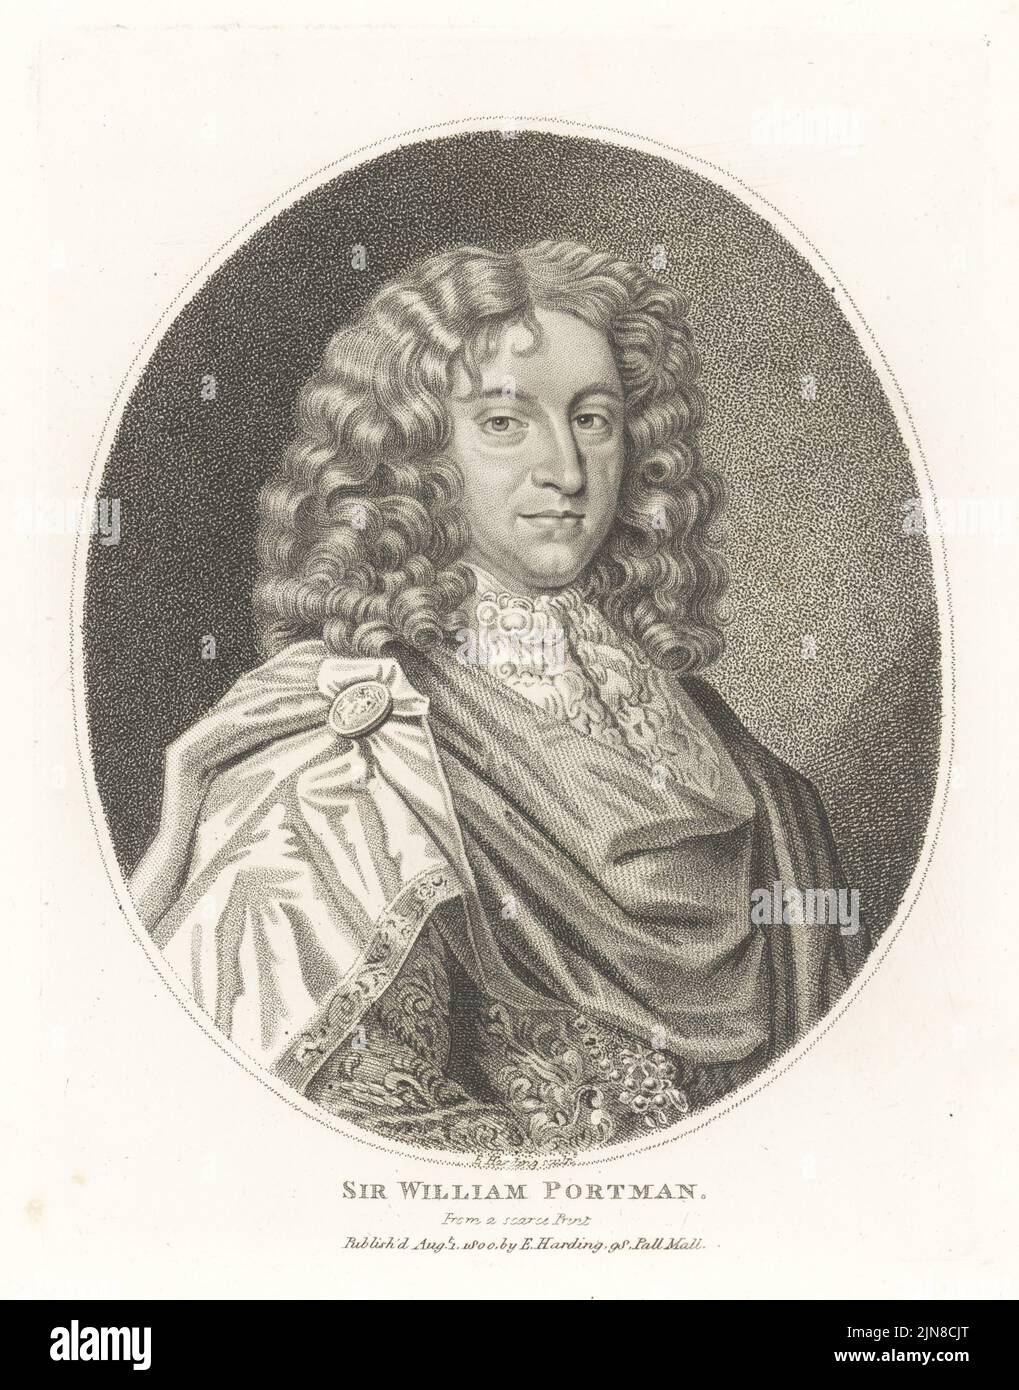 Sir William Portman, 6th Baronet, politician, Knight of the Bath, MP for Taunton and Somerset for the Cavalier Parliament, 1643-1690. In wig, richly embroidered coat with cloak fastened on the shoulder with a brooch.. From a scarce print. Copperplate engraving by Edward Harding from John Adolphus’ The British Cabinet, containing Portraits of Illustrious Personages, printed by T. Bensley for E. Harding, 98 Pall Mall, London, 1800. Stock Photo